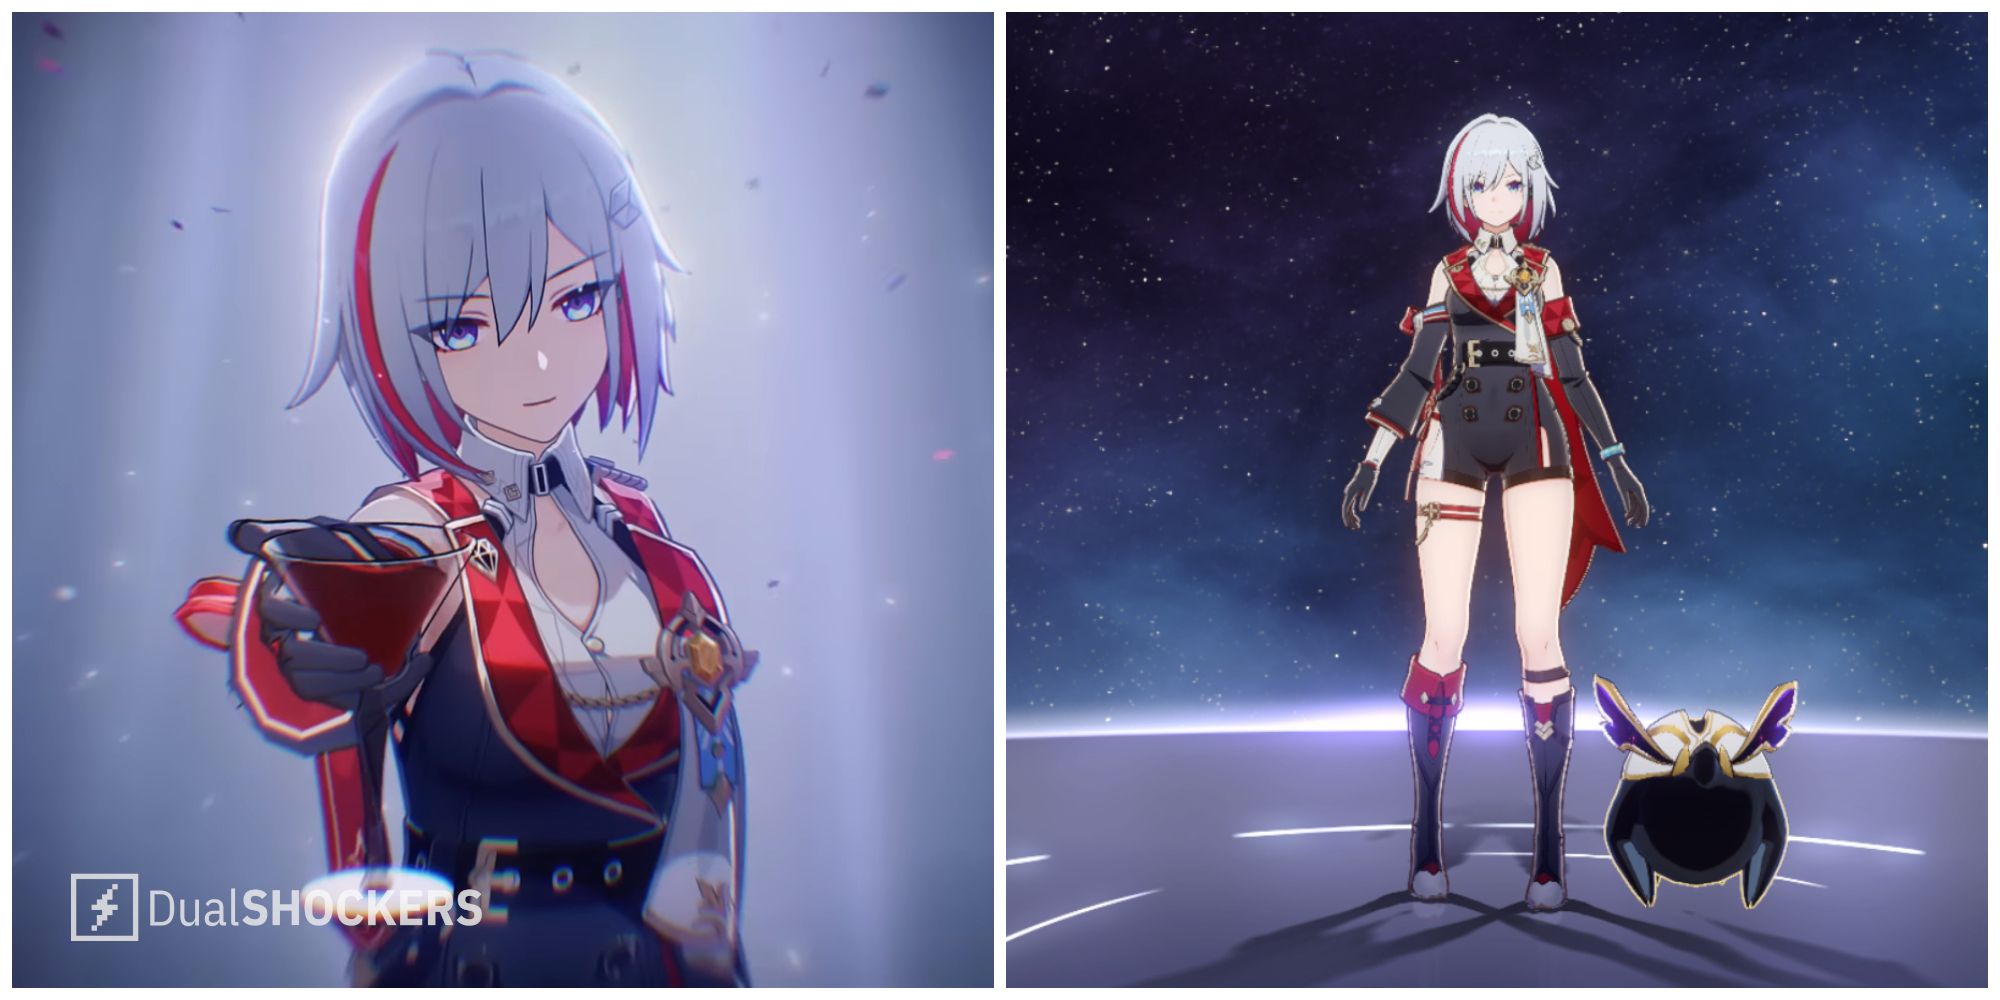 Split image of Topaz in a character demo and in her main profile page in Honkai Star Rail.